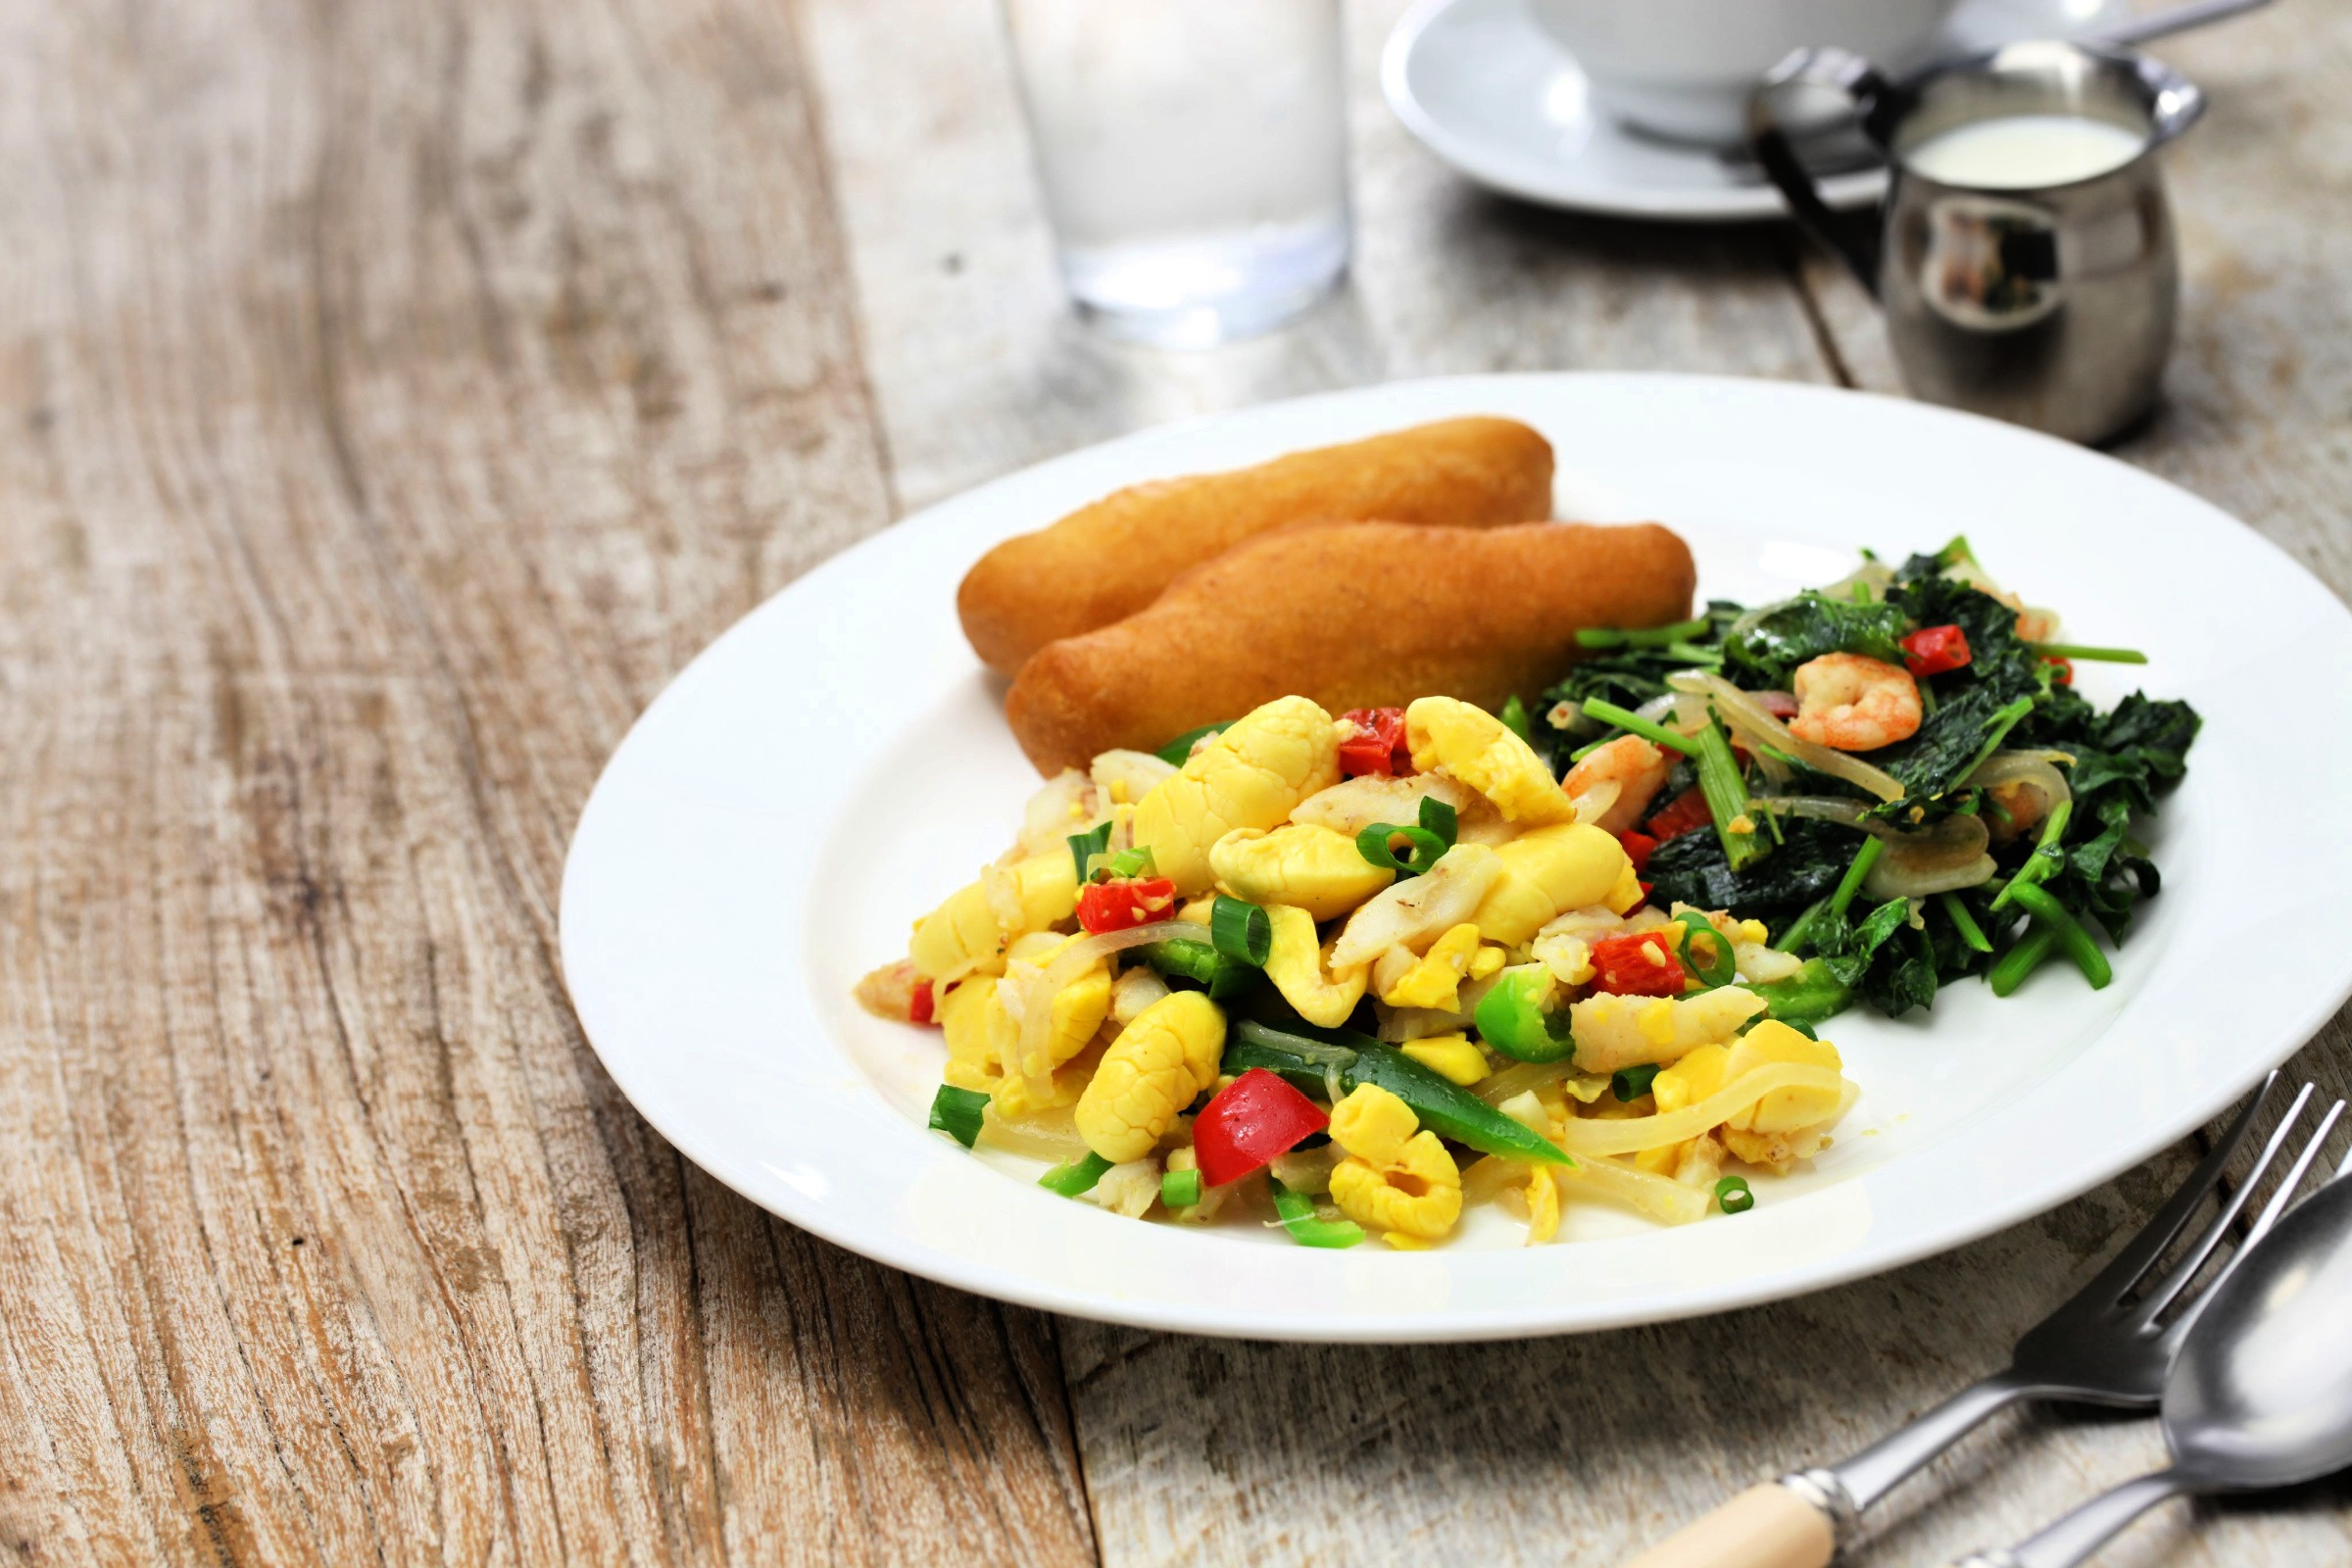 Ackee and saltfish - Divine Simplicity